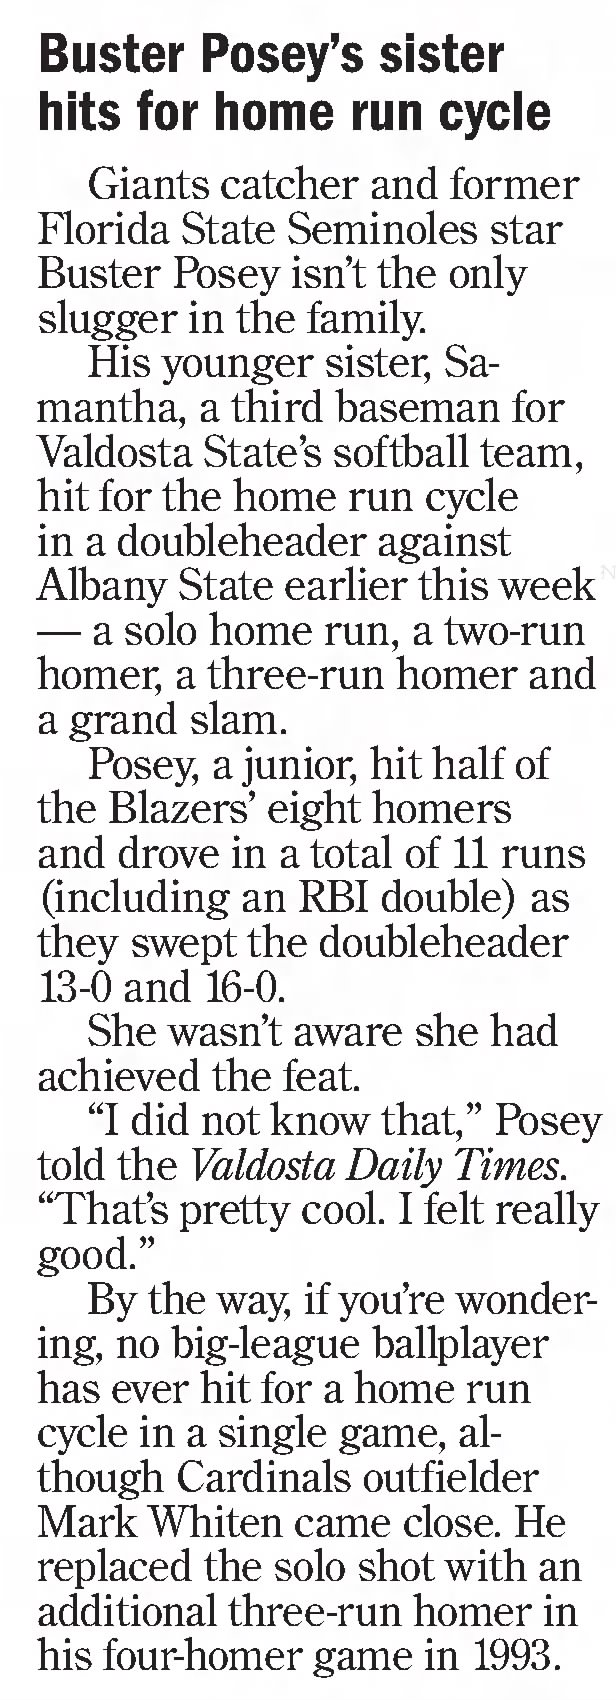 Buster Posey's sister hits for home run cycle